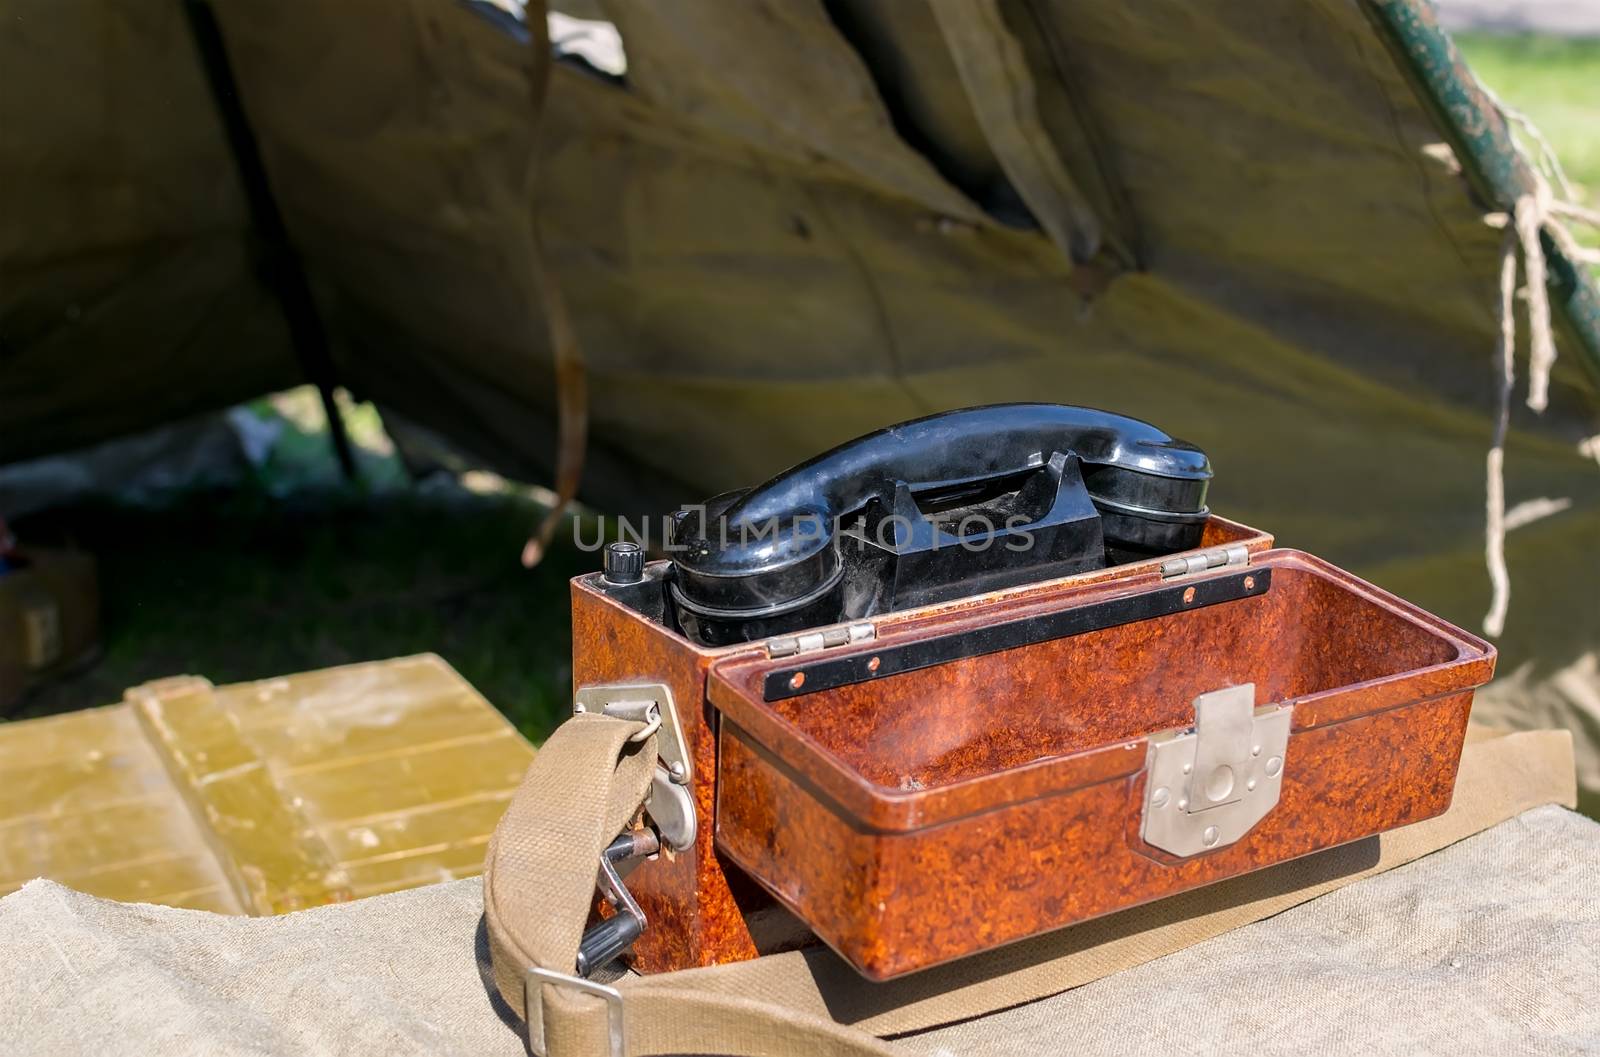 old military wired phone stands on the table in the army tent